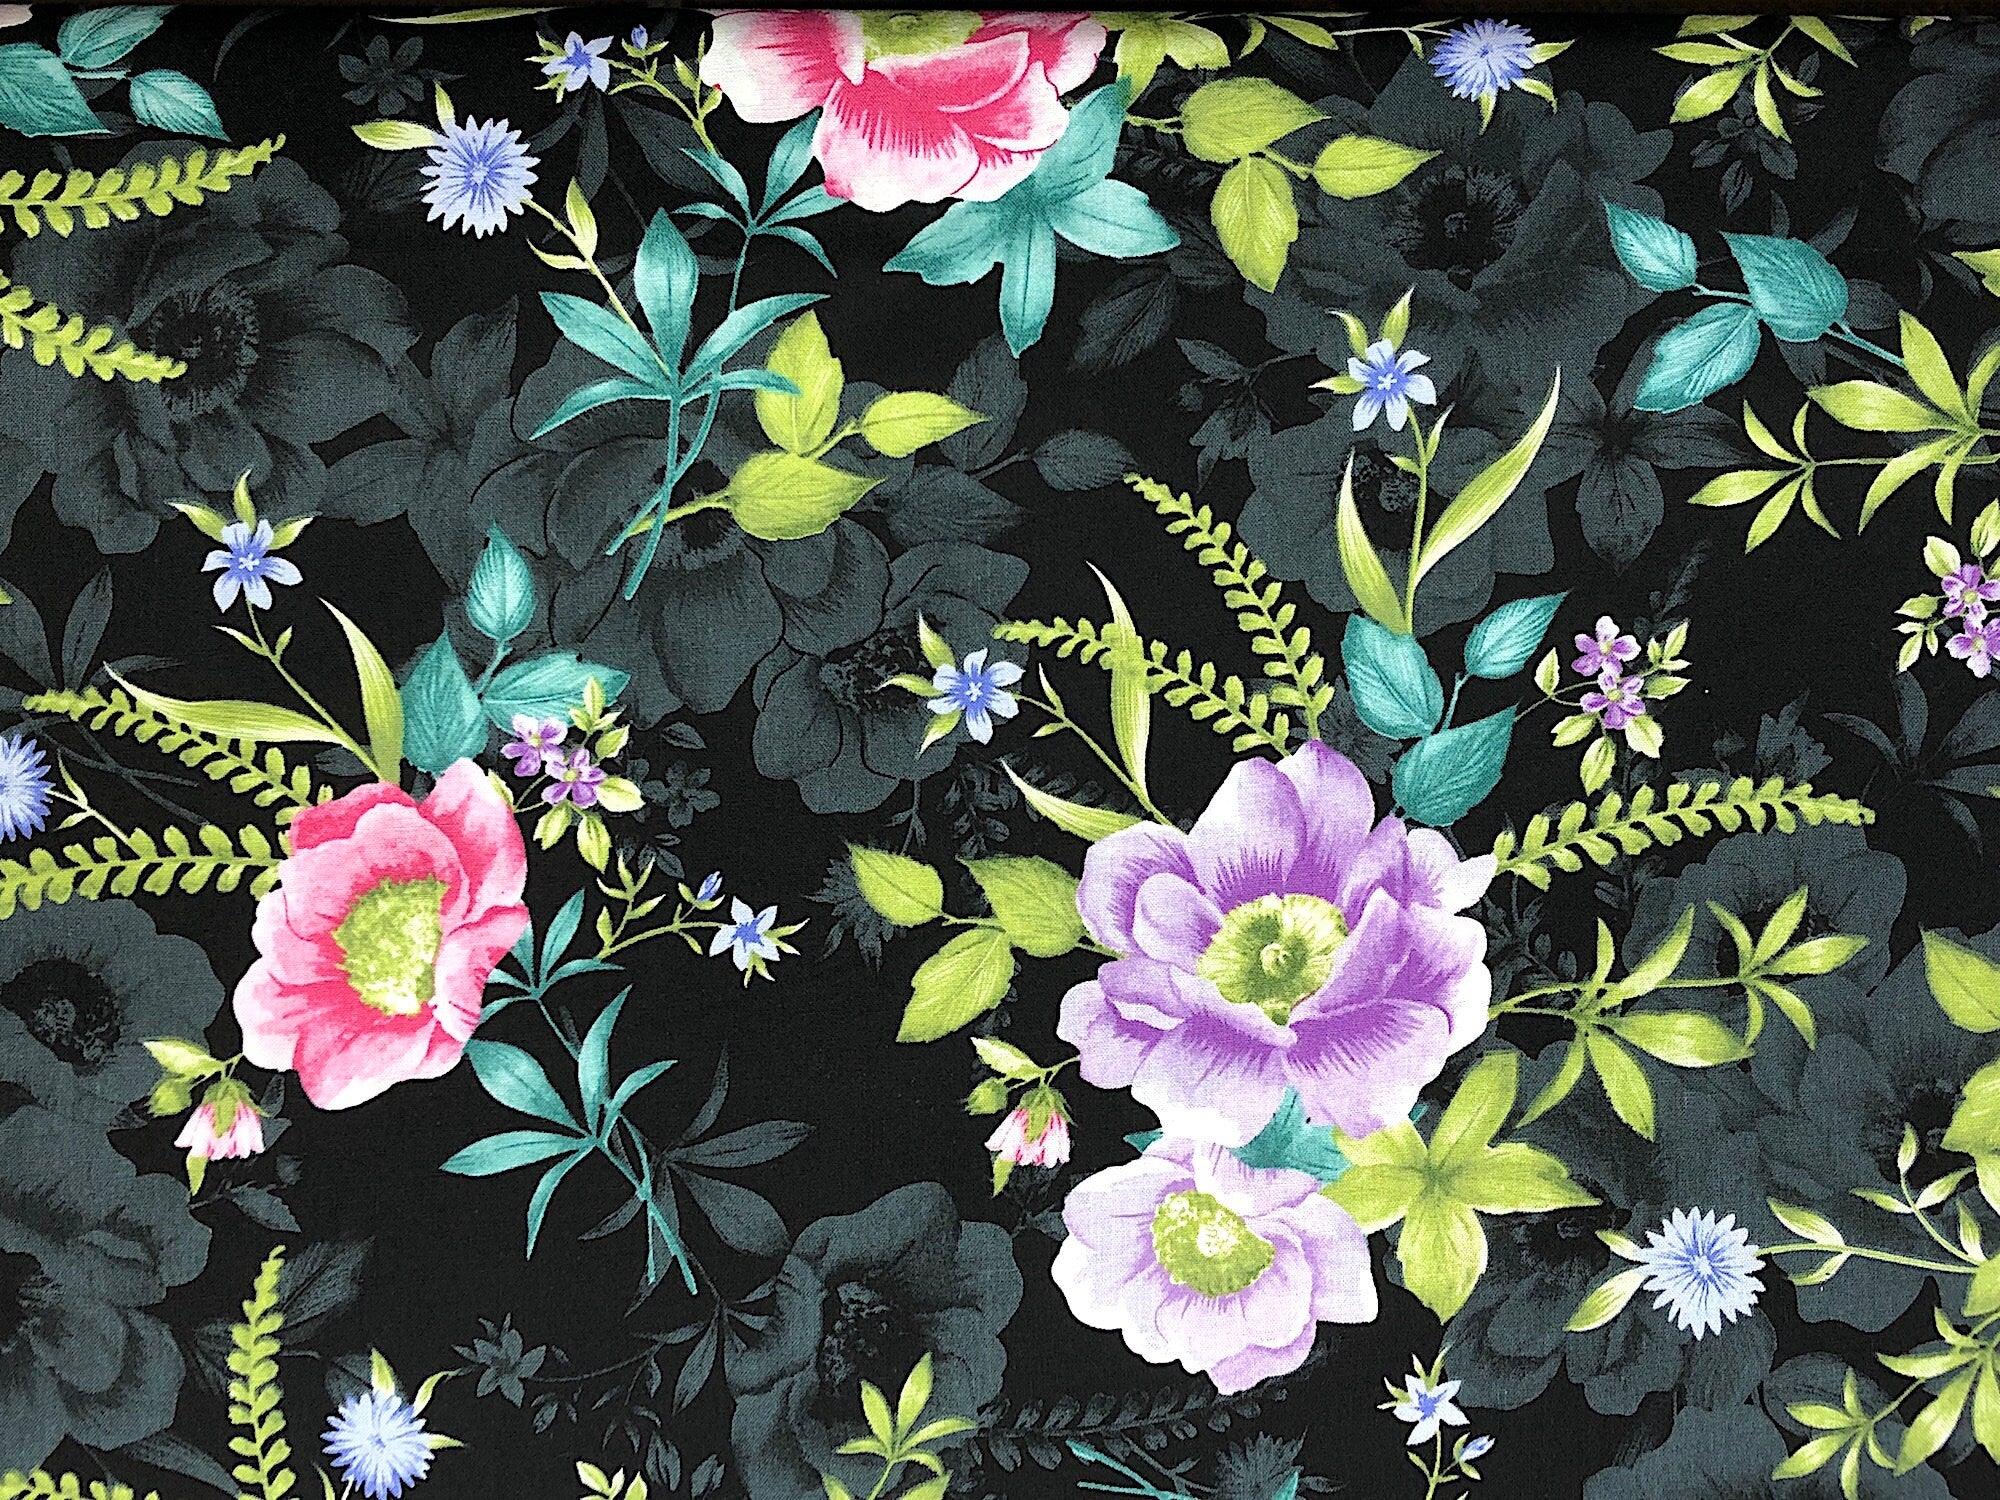 Black cotton fabric covered with pink and purple flowers.